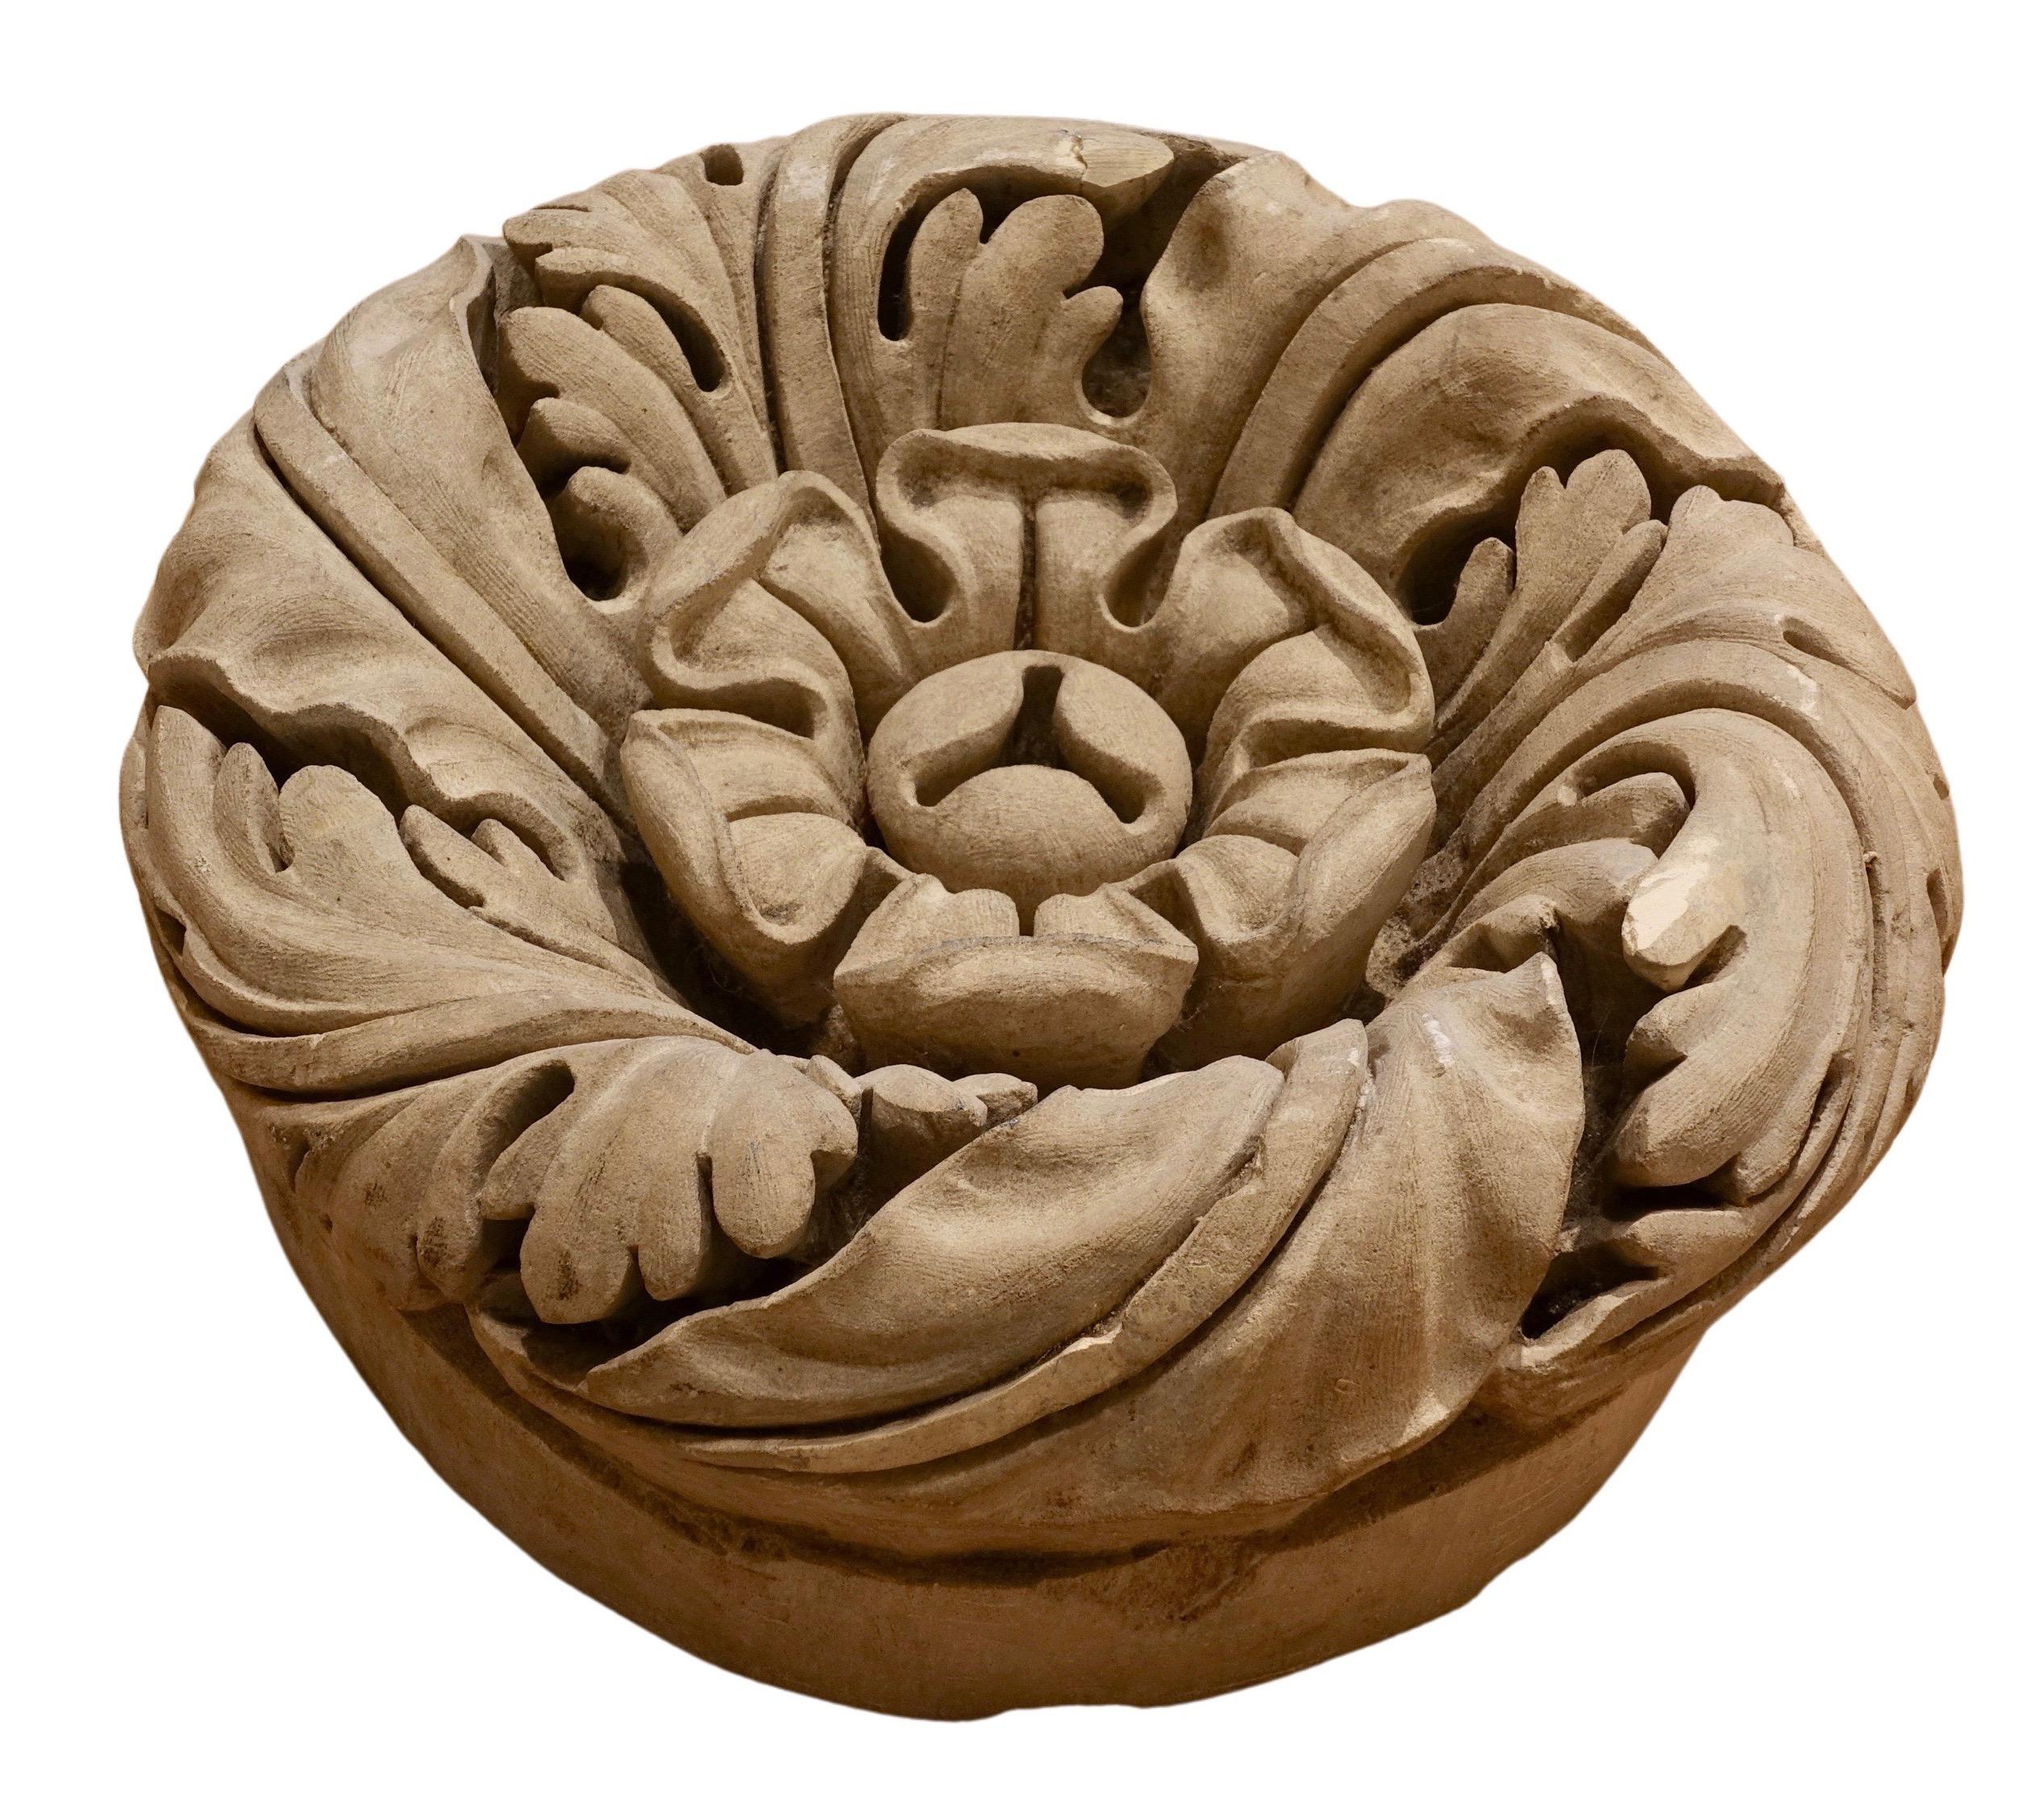 Large carved stone rosette
France, 18th century
Diameter: 29.5 cm

This carved rosette likely adorned a ceiling. This rounded vault key exhibits a delicately crafted decor, with deeply carved piercings. This virtuoso work adeptly plays with light